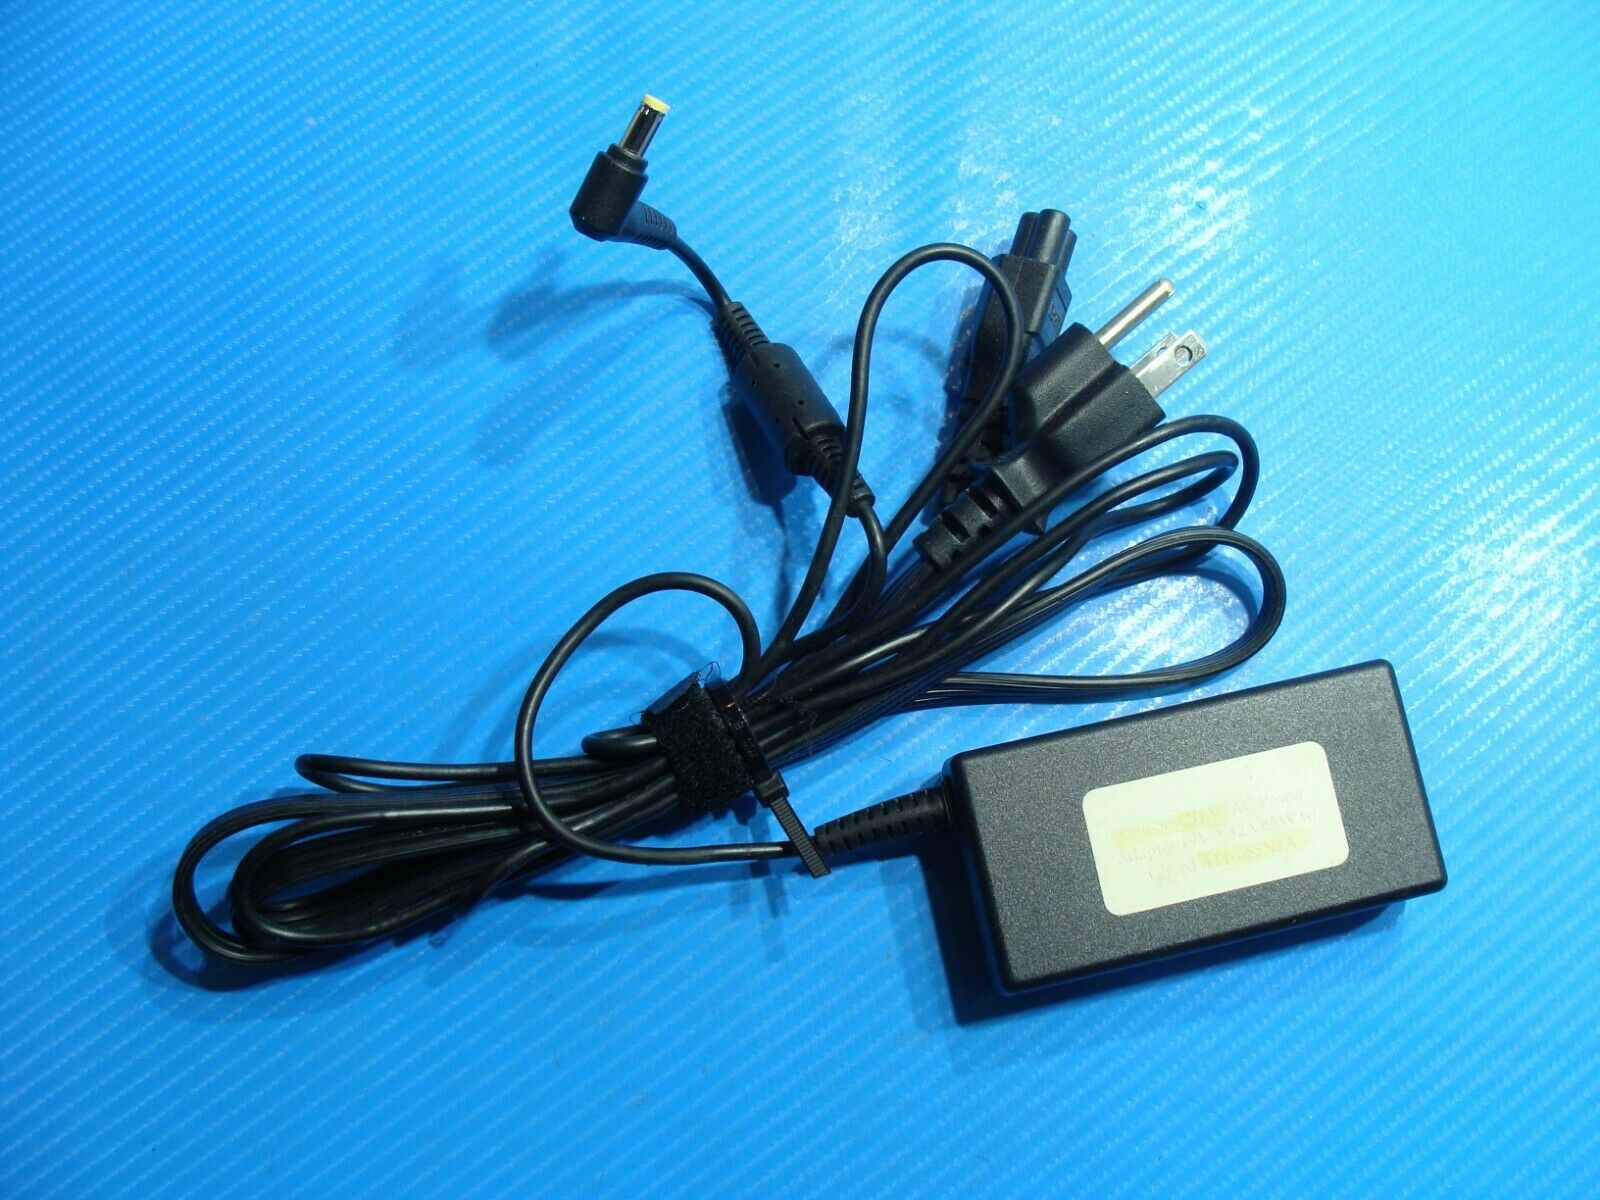 Chicony AC Power Adapter Charger For Acer P/N A11-065N1A 19v 3.42a Tip 1.7*5.5mm 